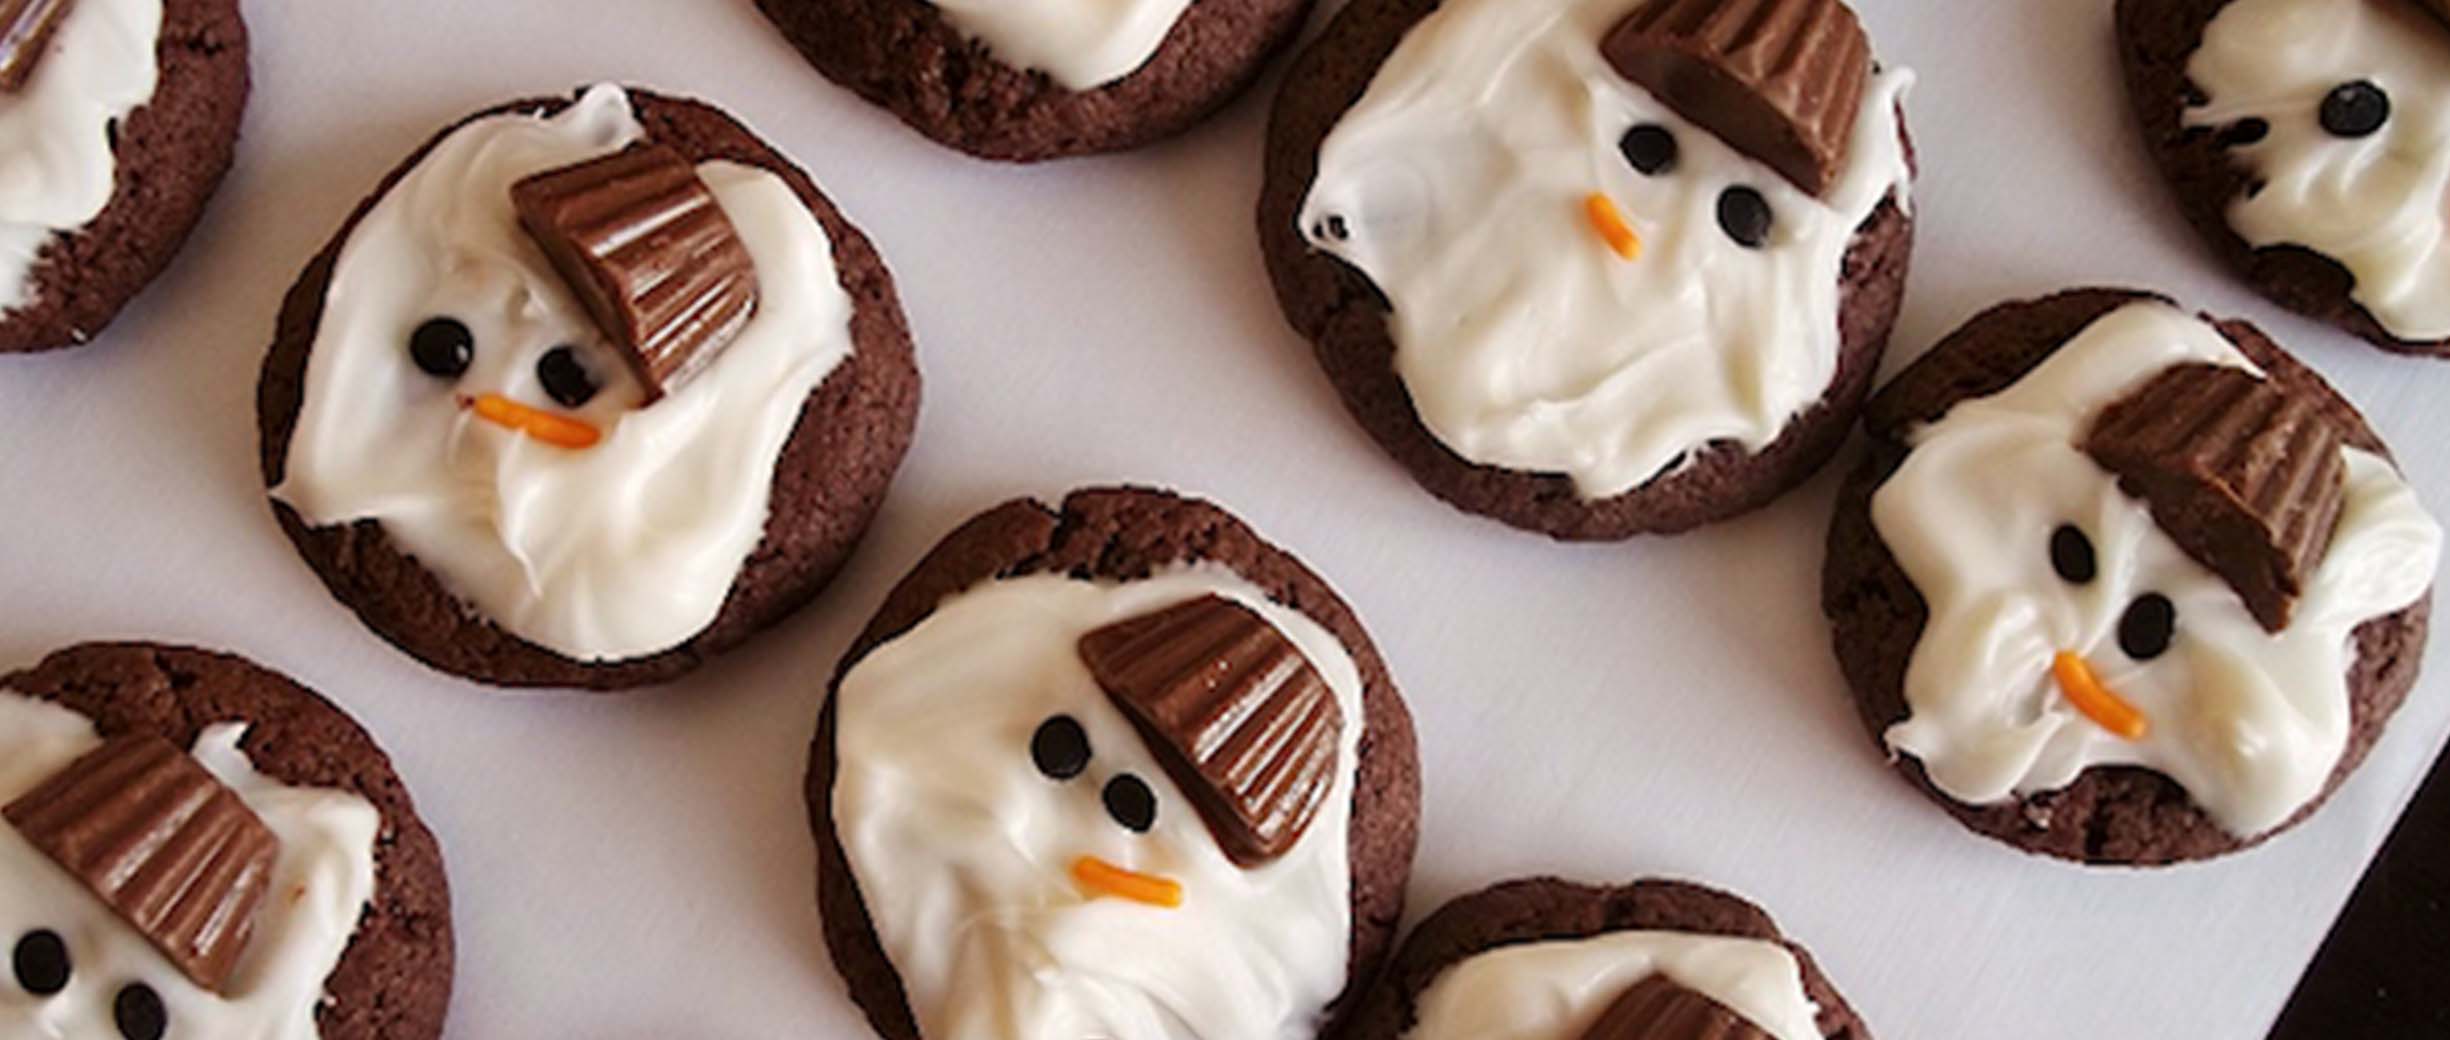 Cookie Bake Off: Add Melted Snowman Cookies to Your Family's List of Easy Recipes